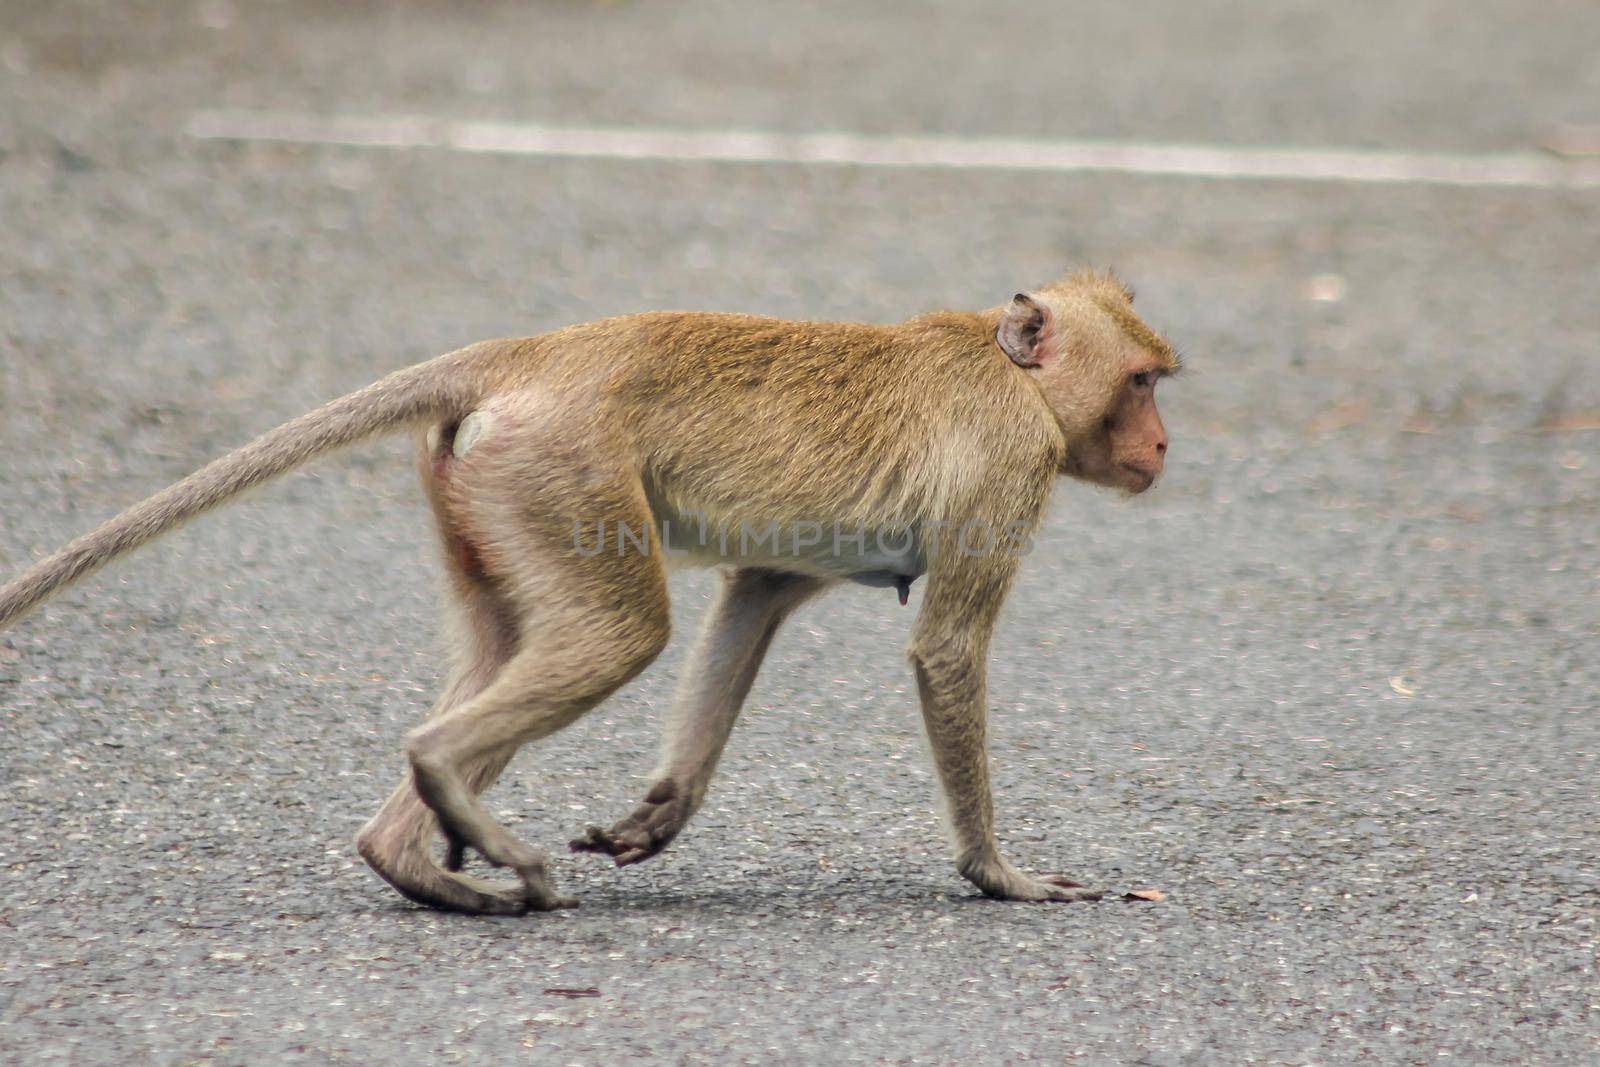 A female crab-eating macaque walking down the street.
The macaque has brown hair on its body. The tail is longer than the length of the body. The hair in the middle of the head is pointed upright.